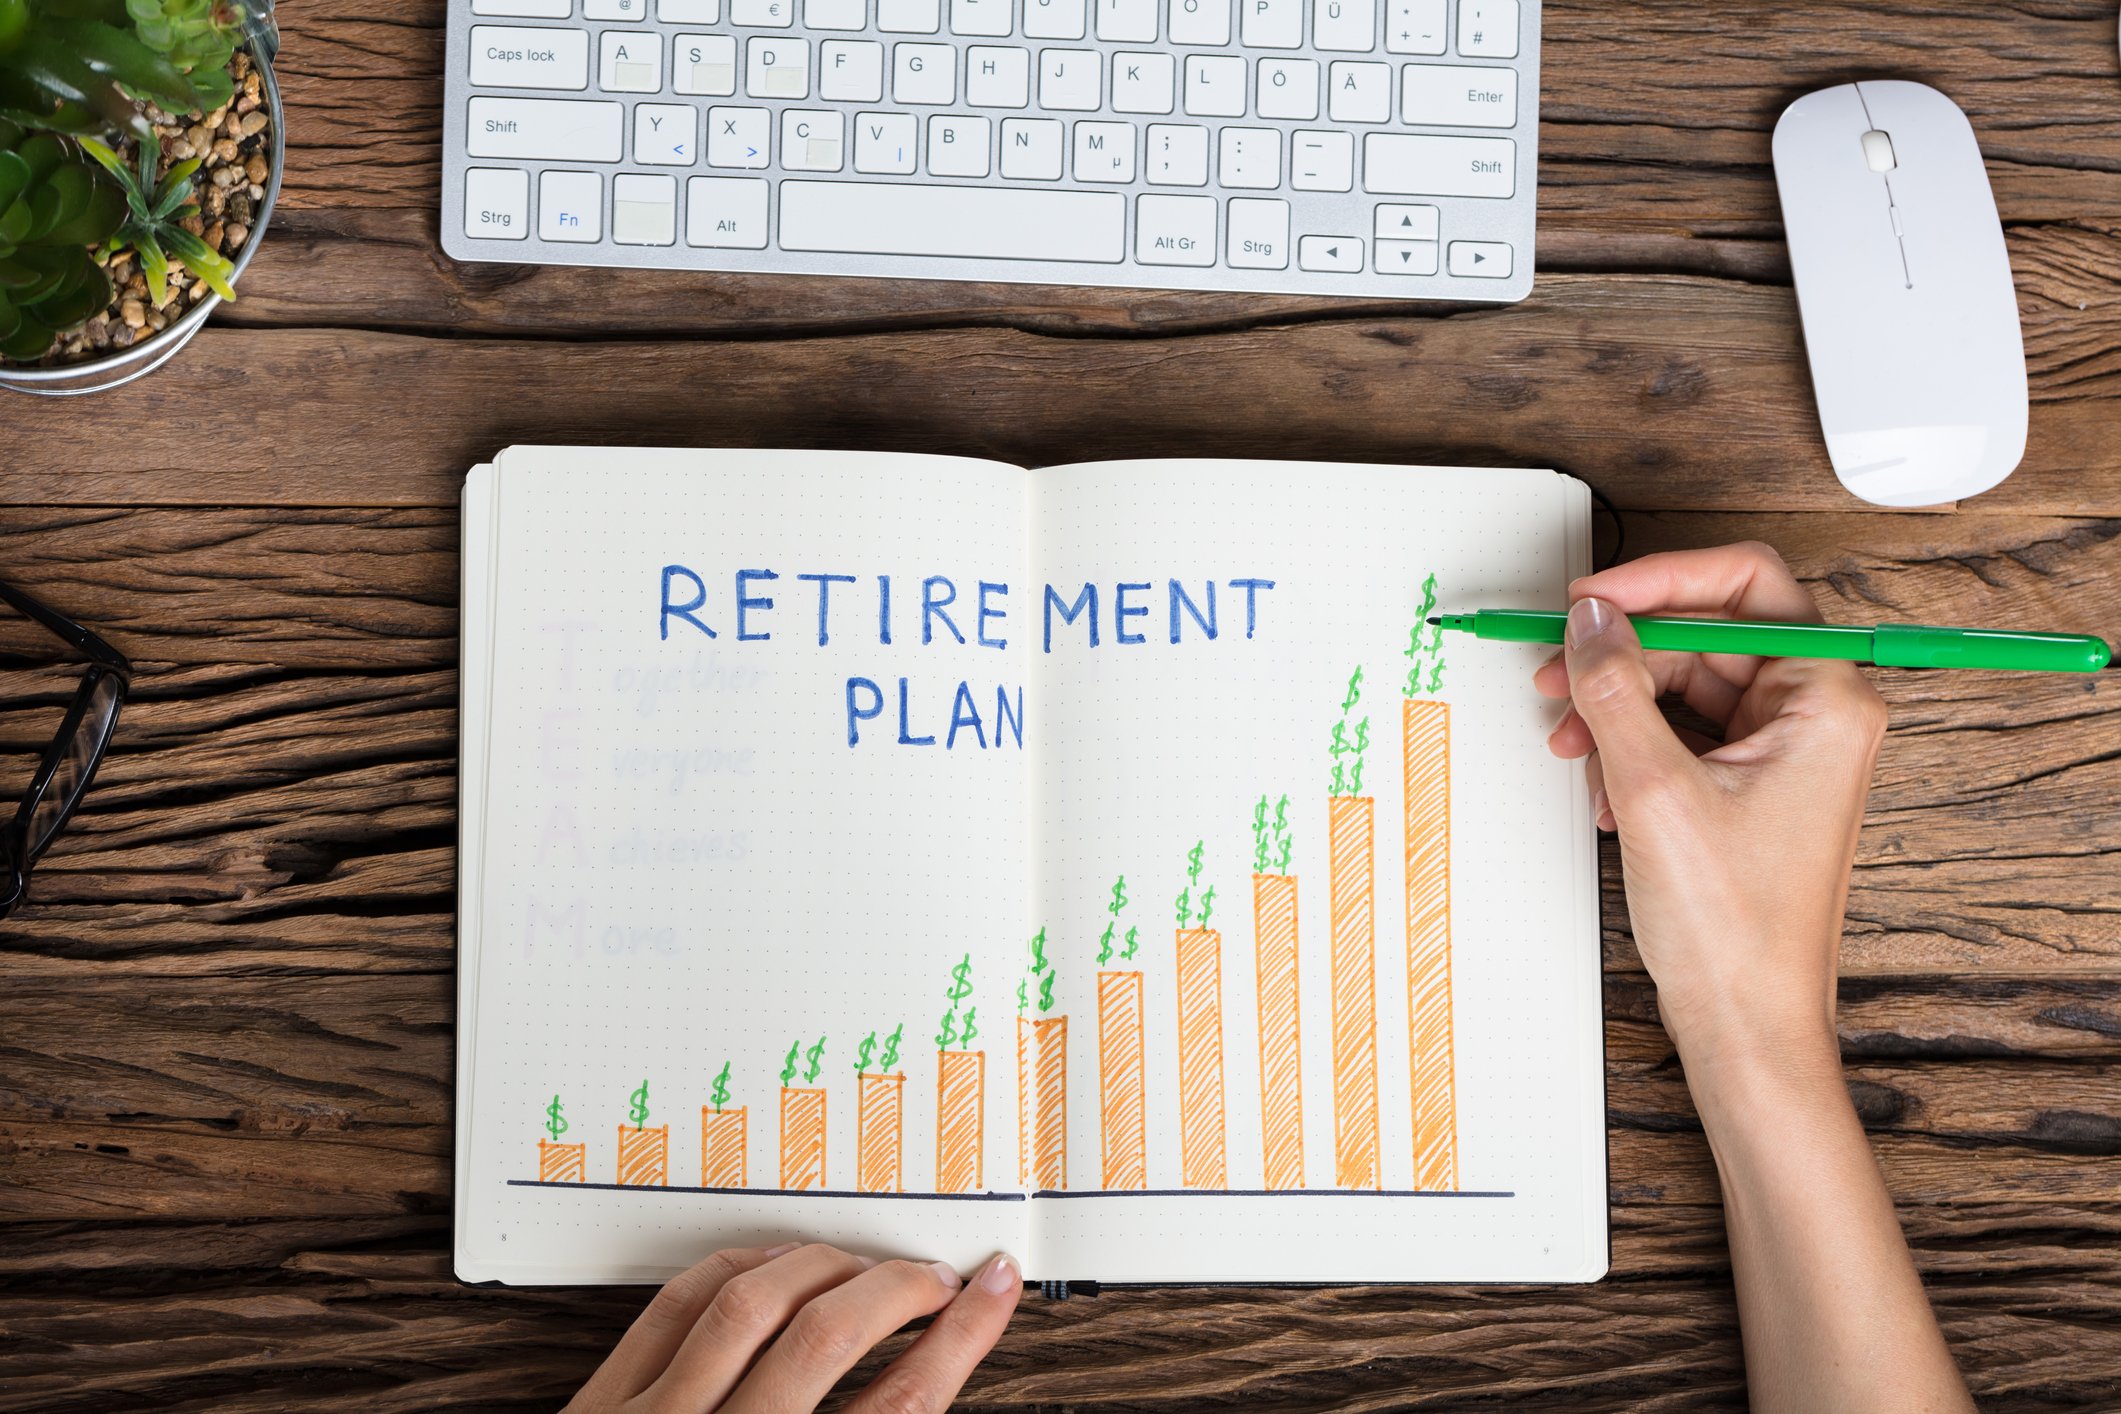 pension-or-no-pension-have-a-plan-for-creating-retirement-income